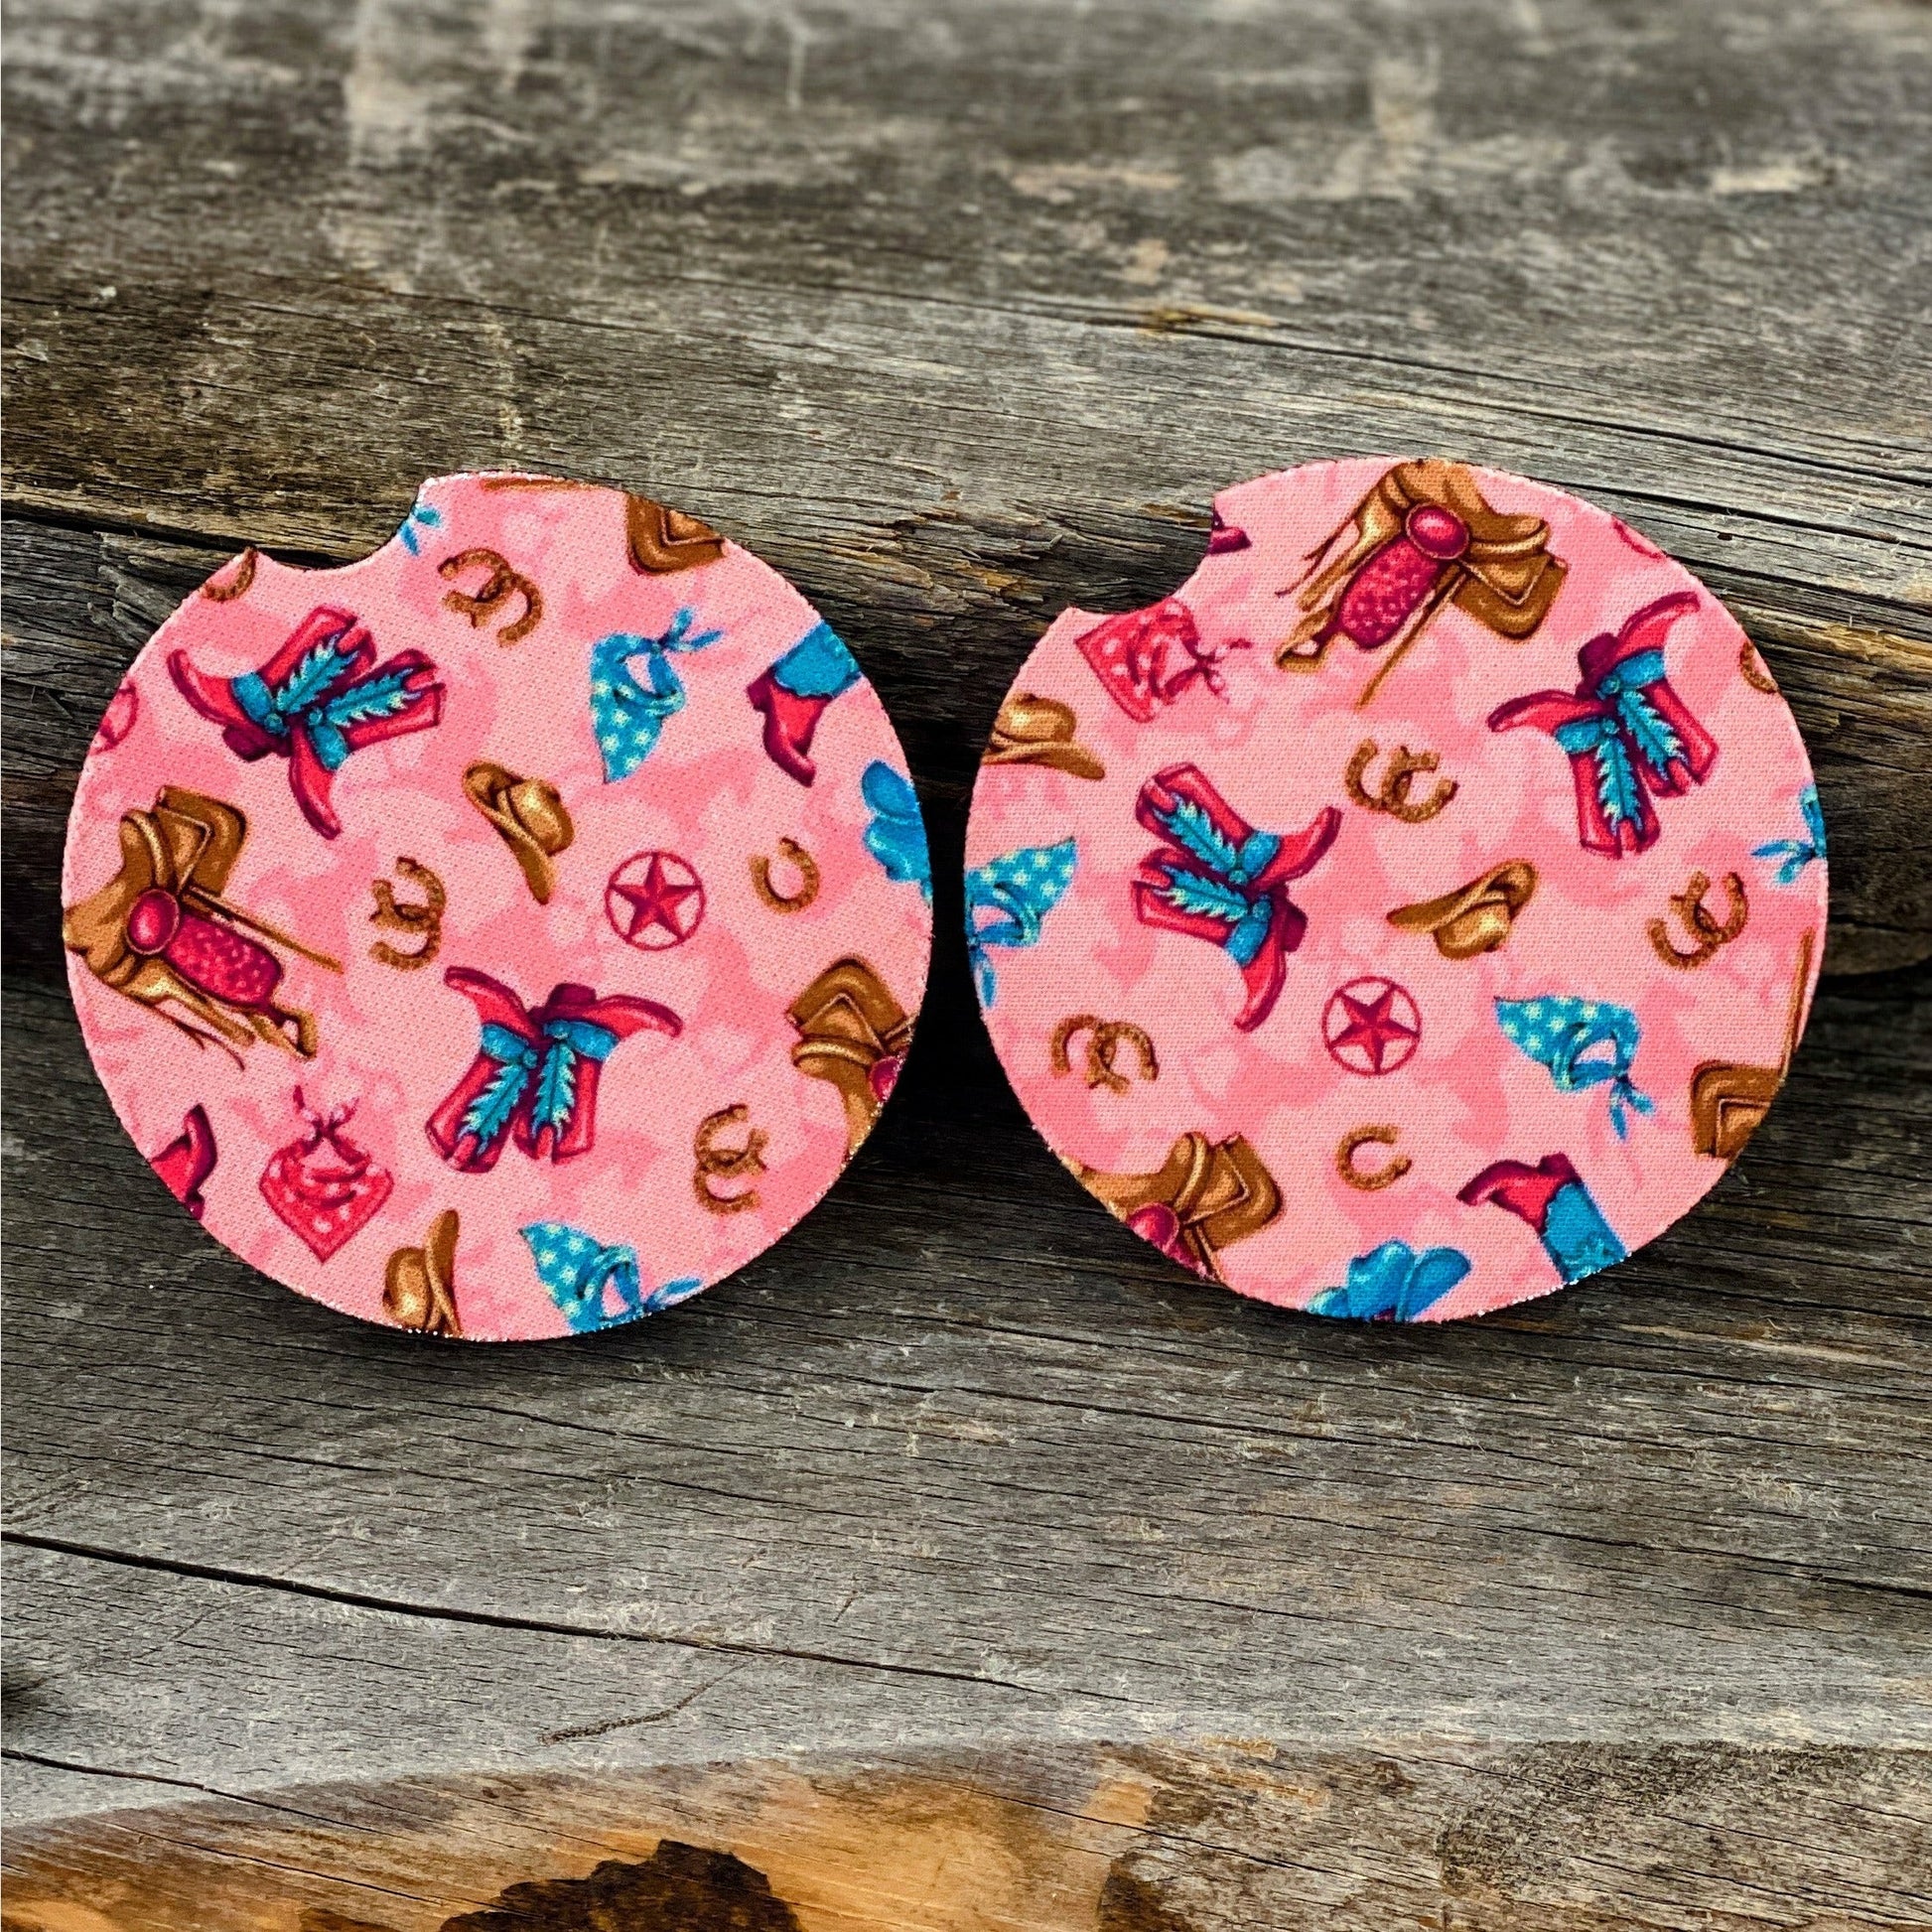 Cleaning is a breeze with our car coasters. When they encounter stains or spills, simply toss them in the washer, and they'll come out looking as good as new. To maintain their quality, we recommend air drying them.